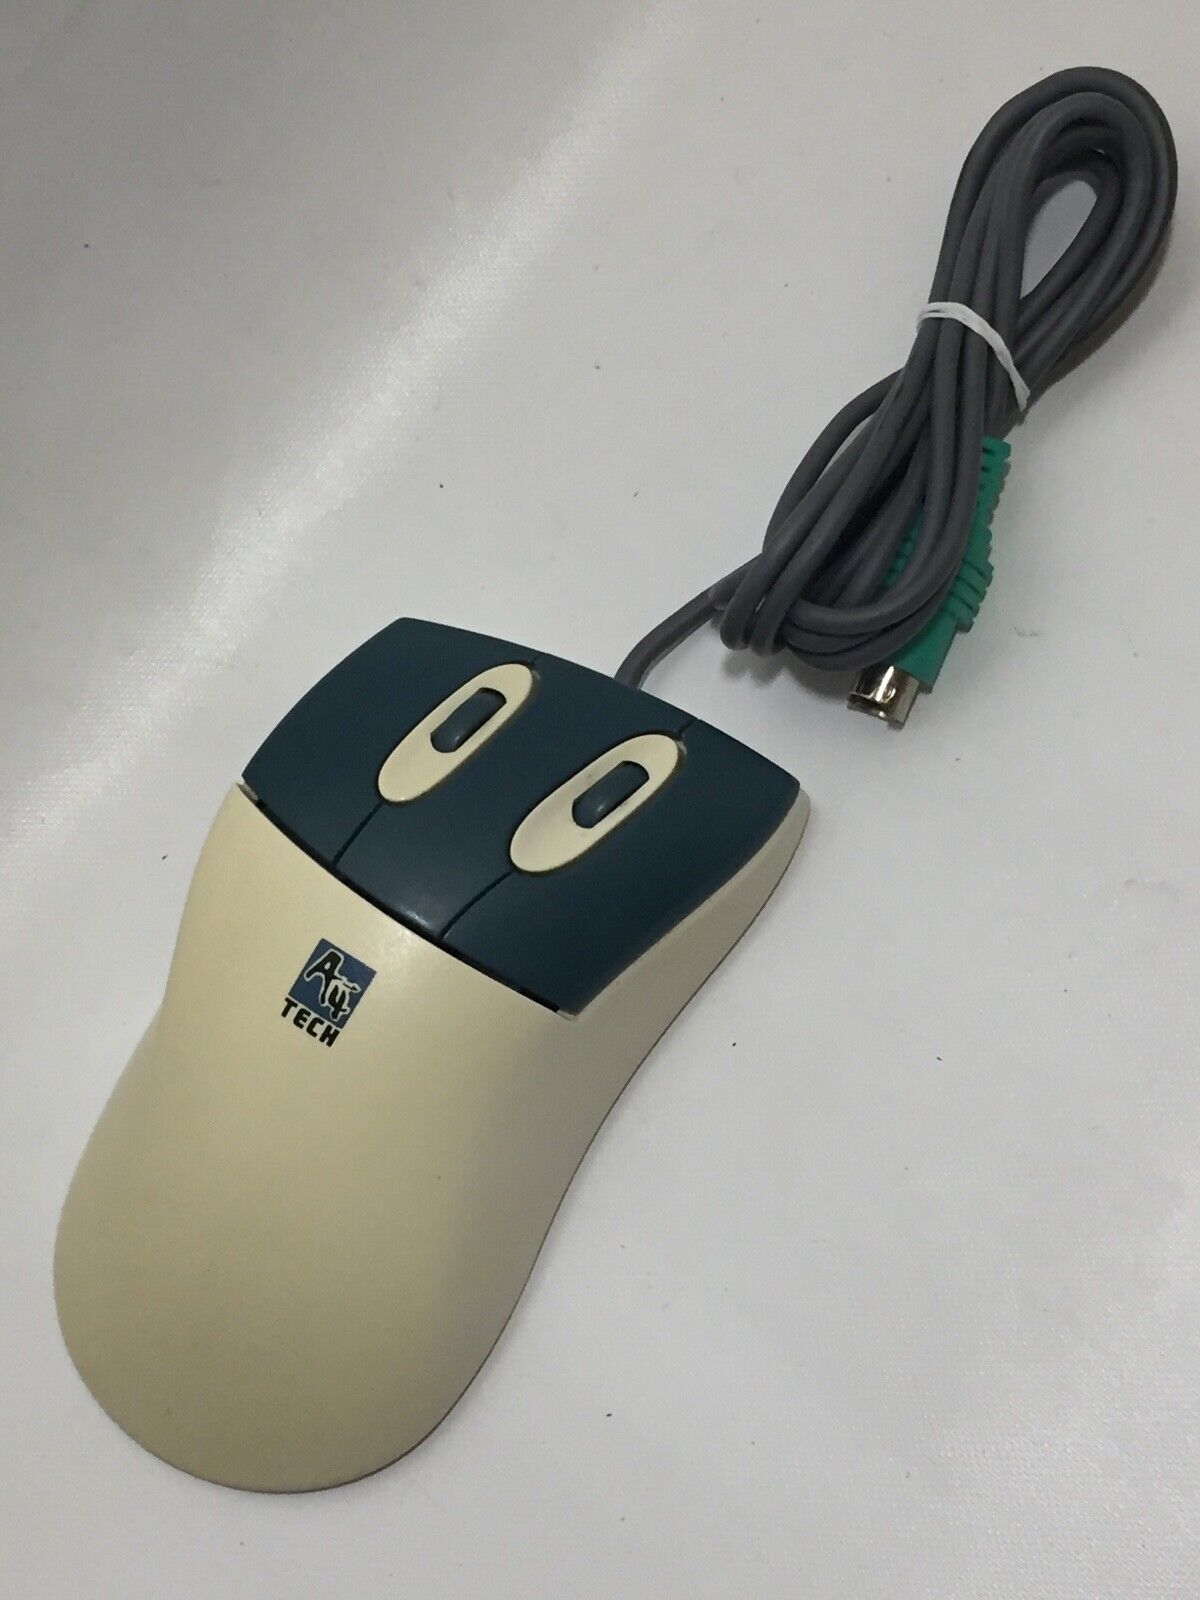 Vintage A4Tech PS/2 Mouse with Horizontal and Vertical Scroll Wheels VERY RARE